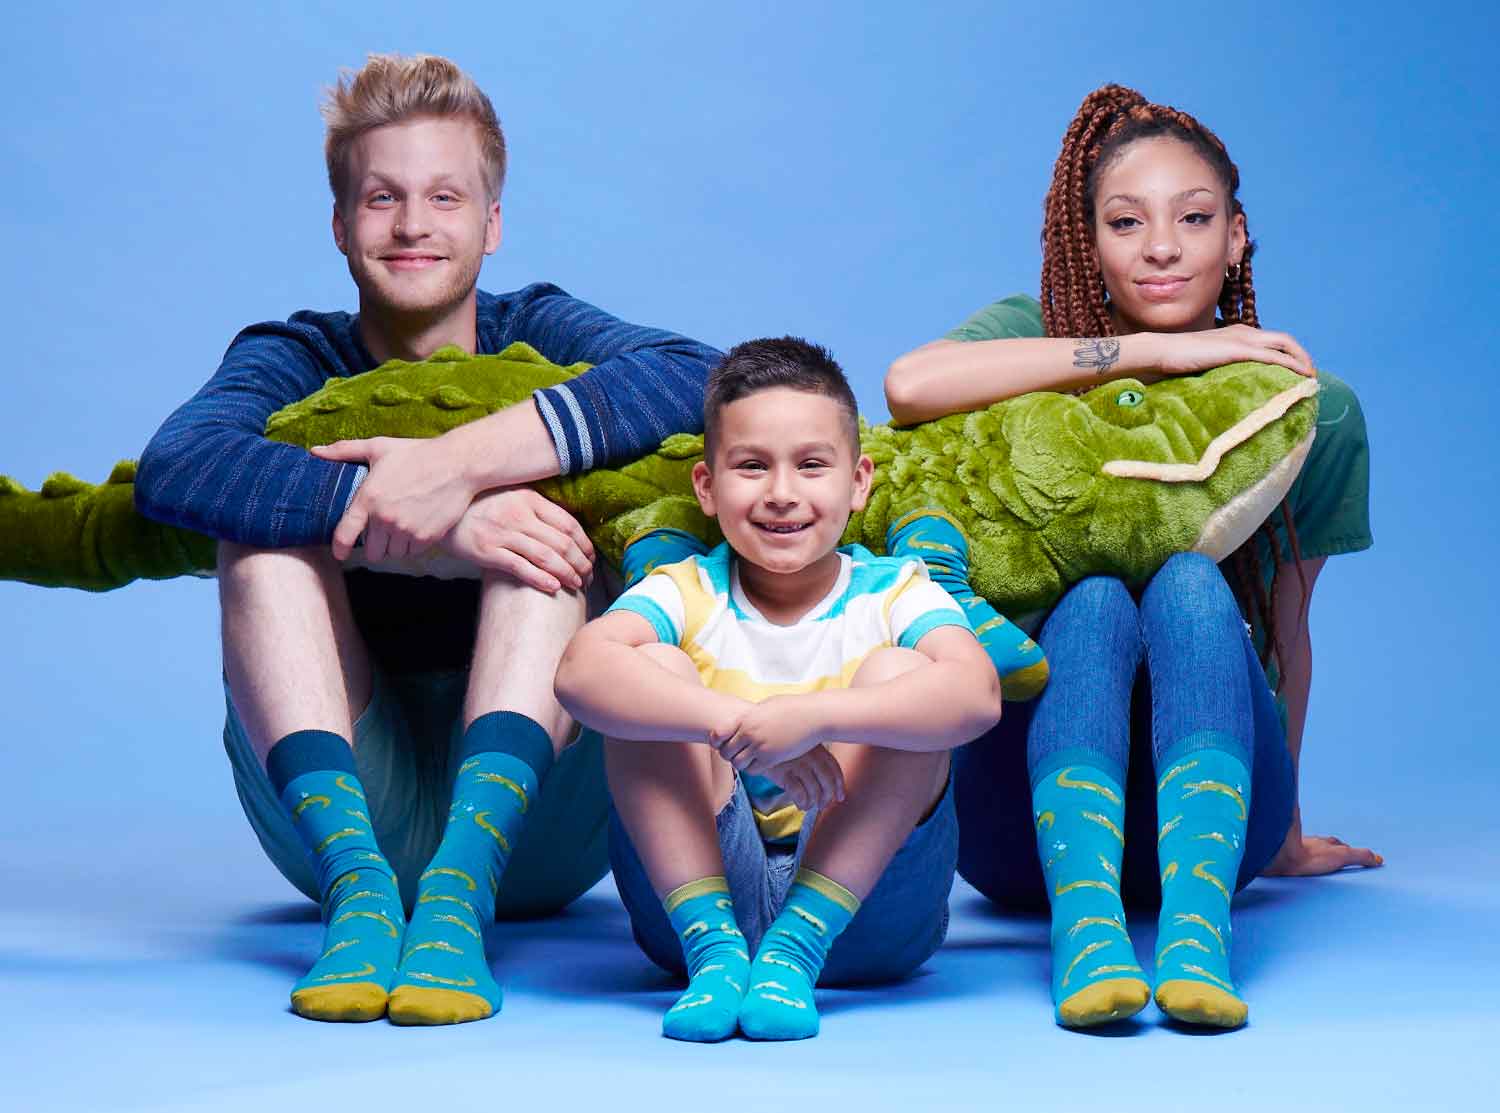 A man, kid, and woman sitting down looking at the camera wearing blue socks with alligators on them, holding a giant stuffed, plush alligator on a blue background.